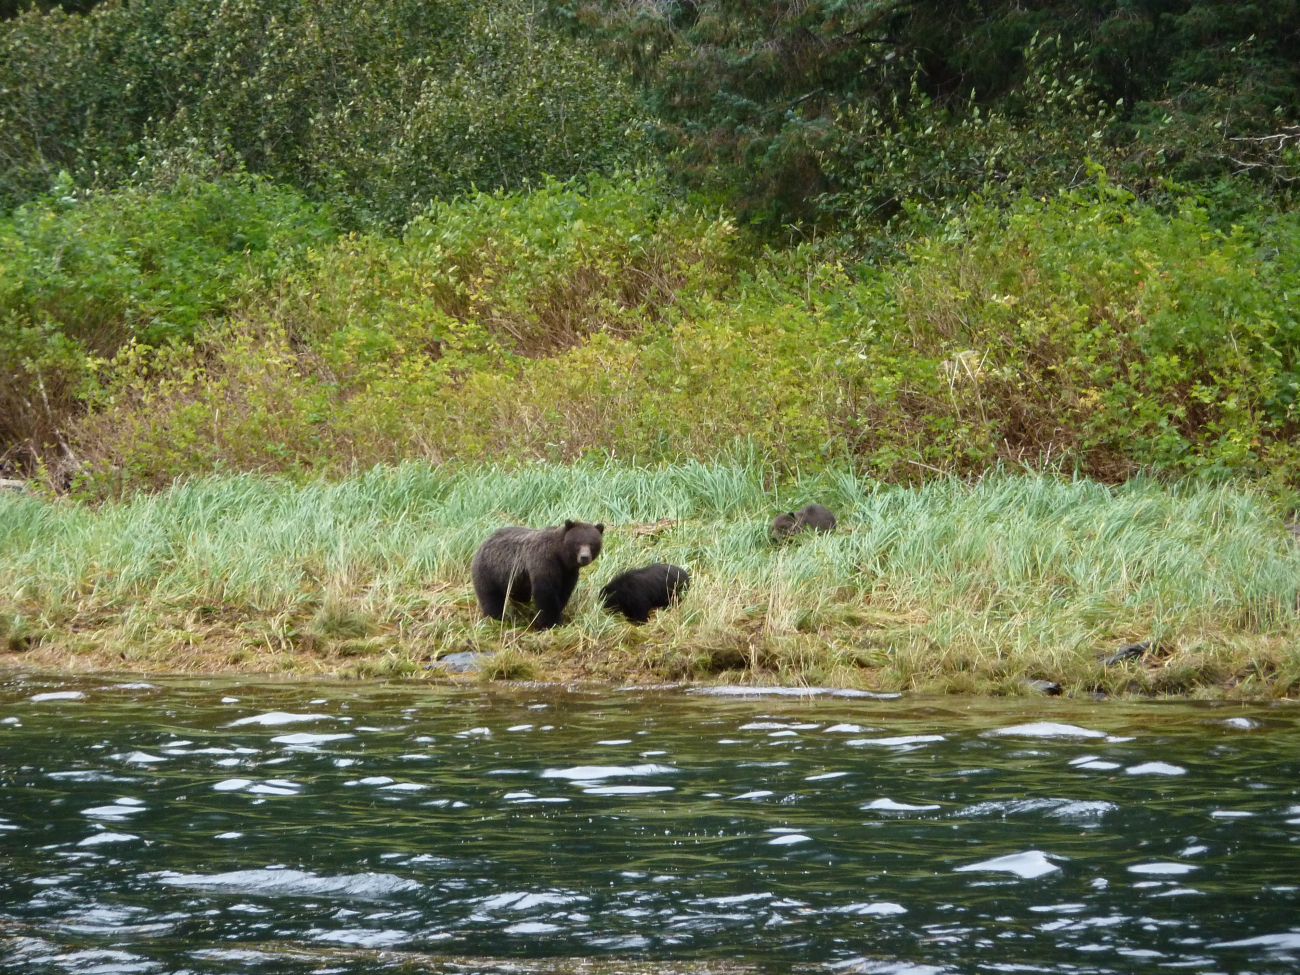 Mother black bear and cub strolling on the shore